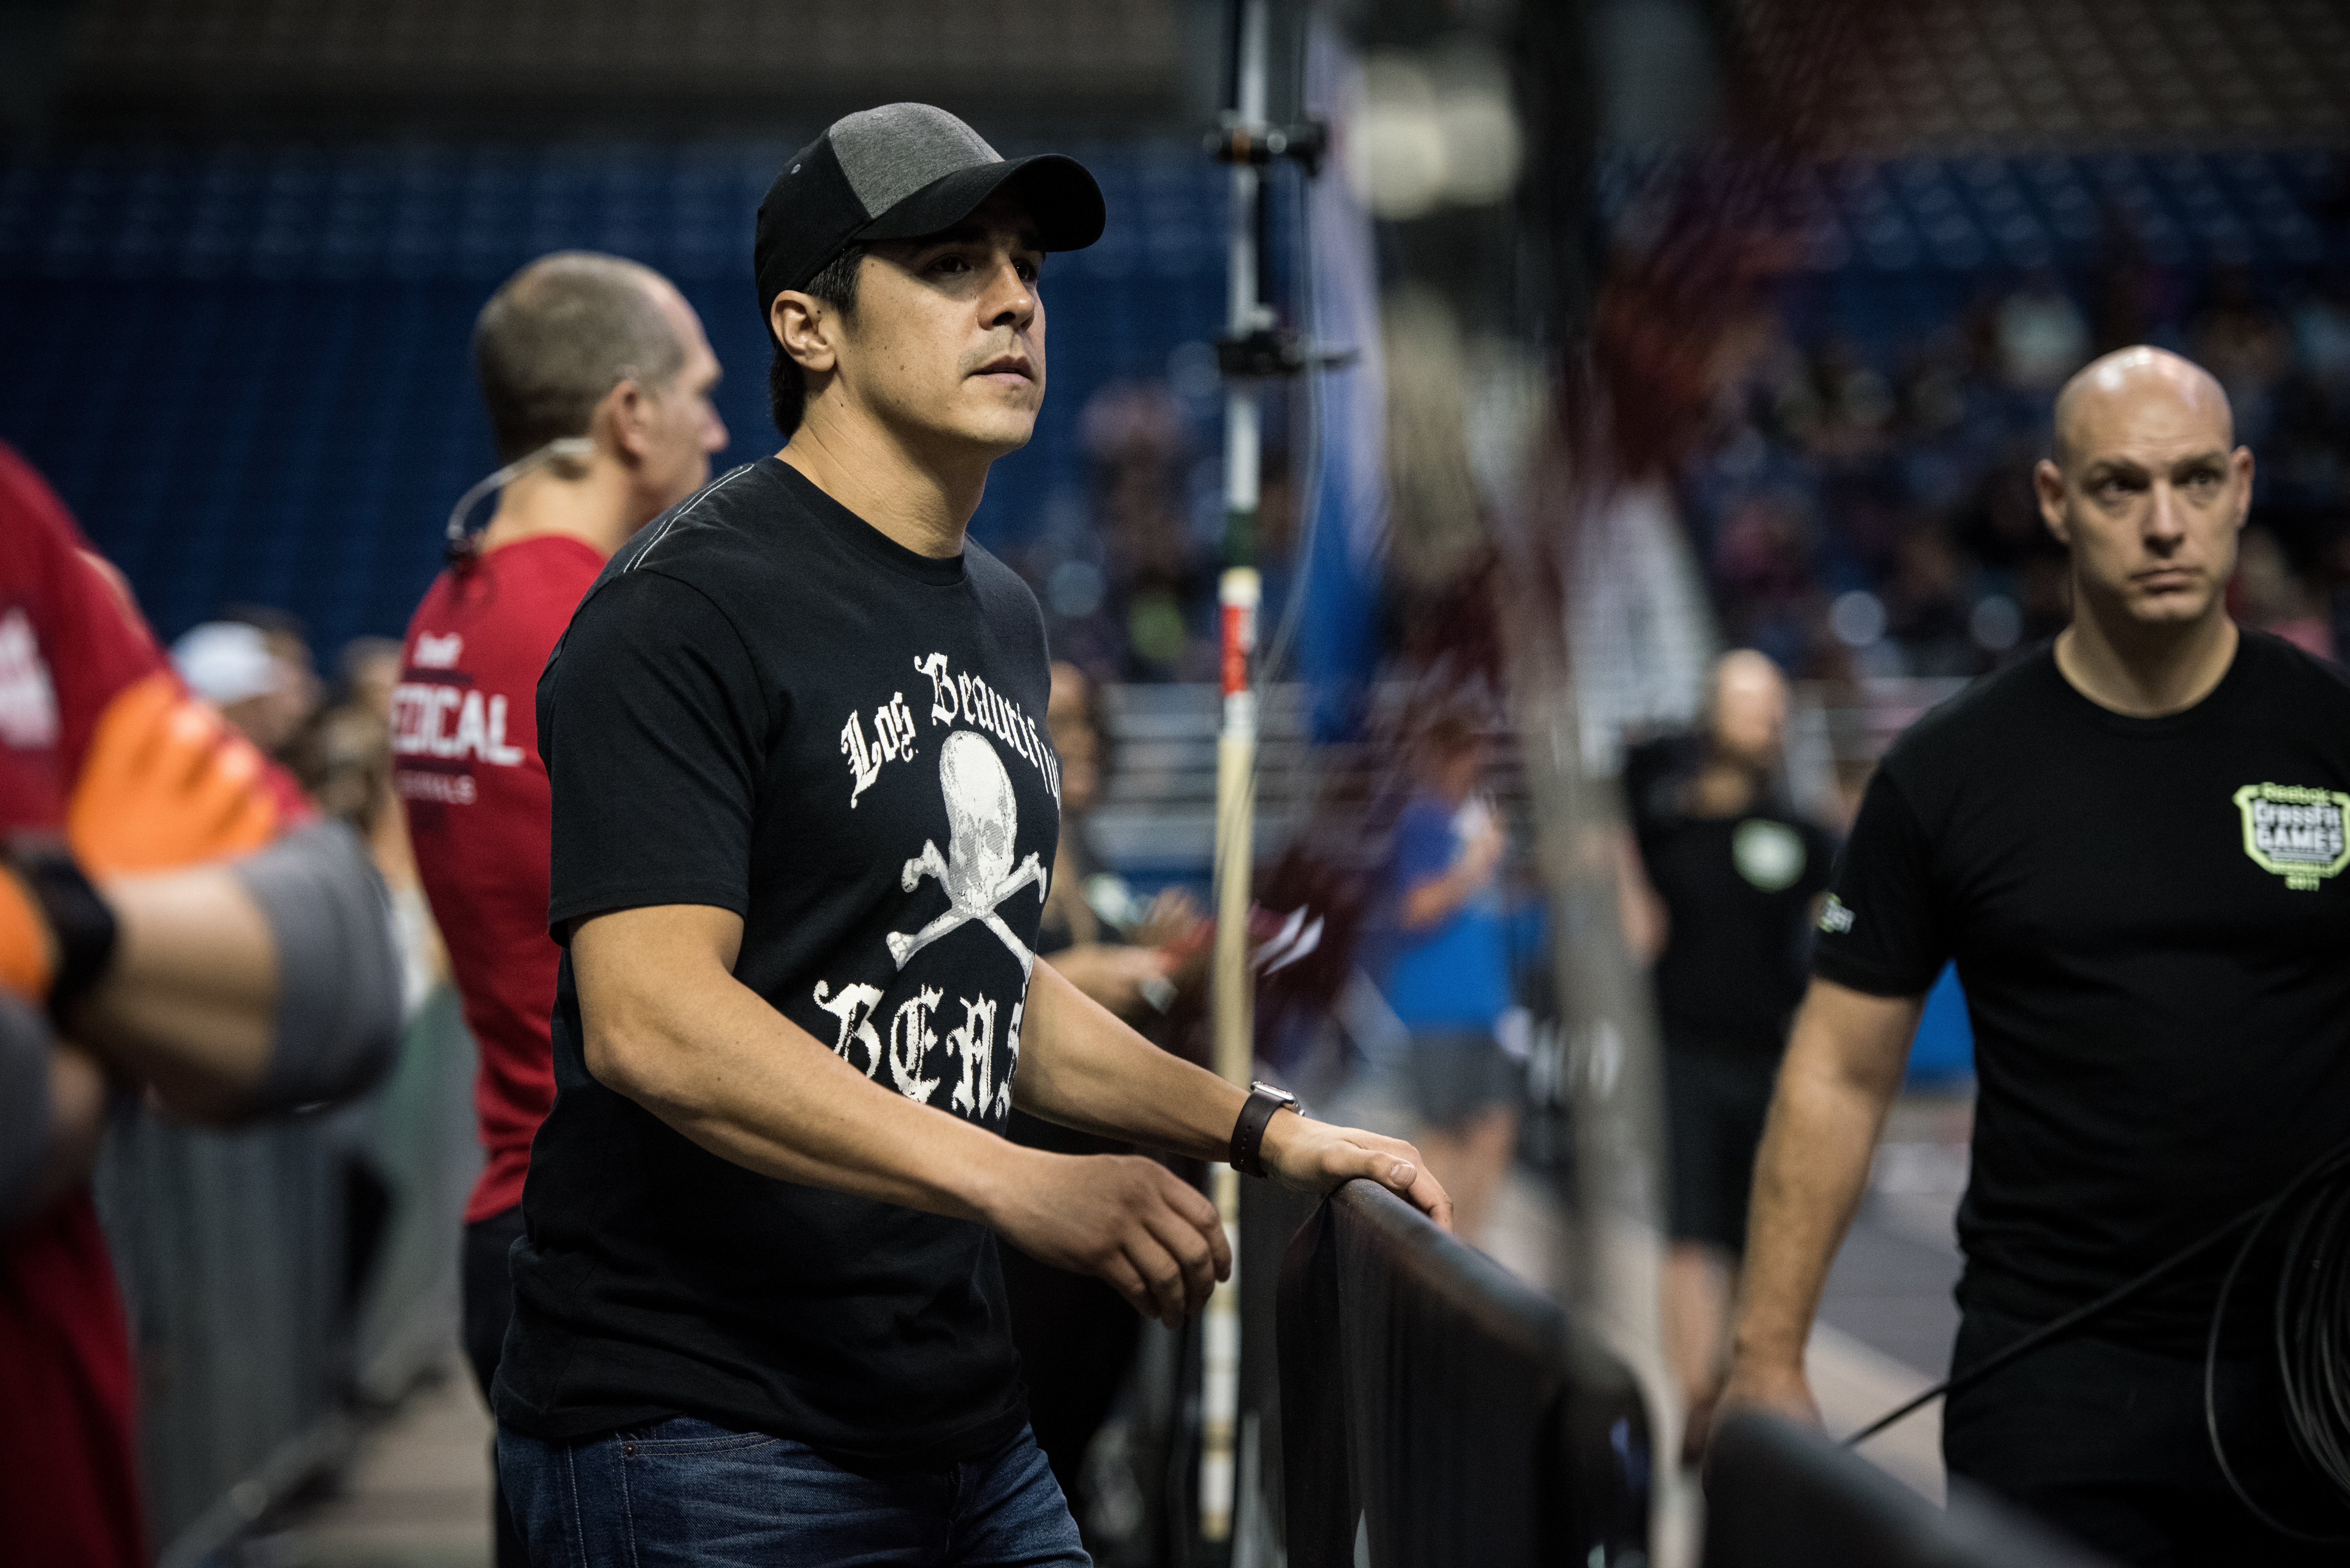 Dave Castro at the 2017 South Regionals